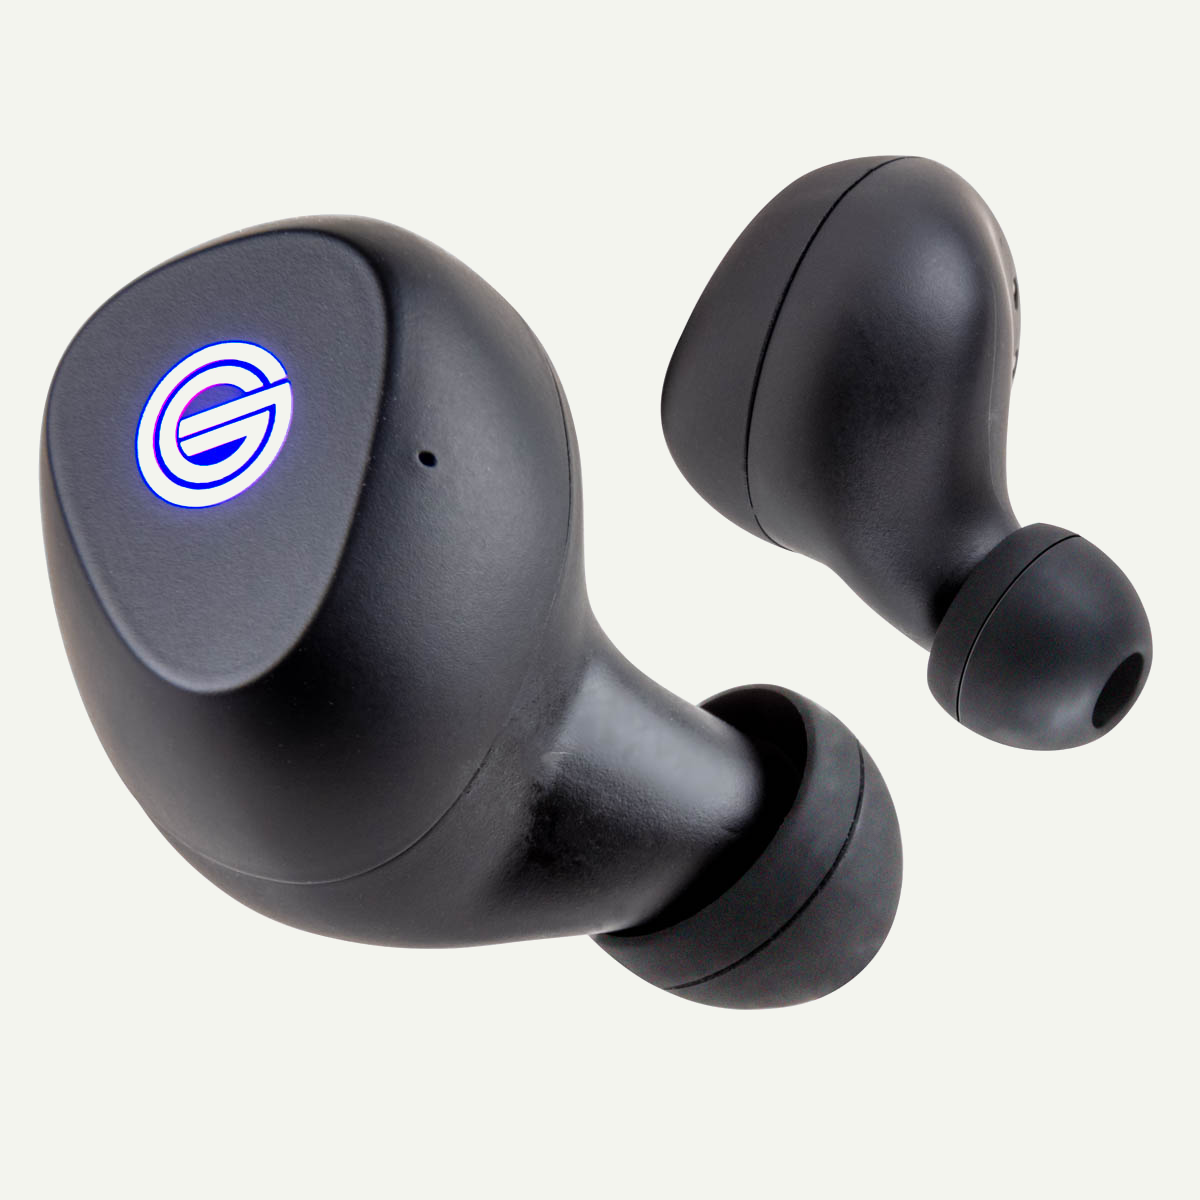 3/4 view photo of GW220 headphones  on a transparent background